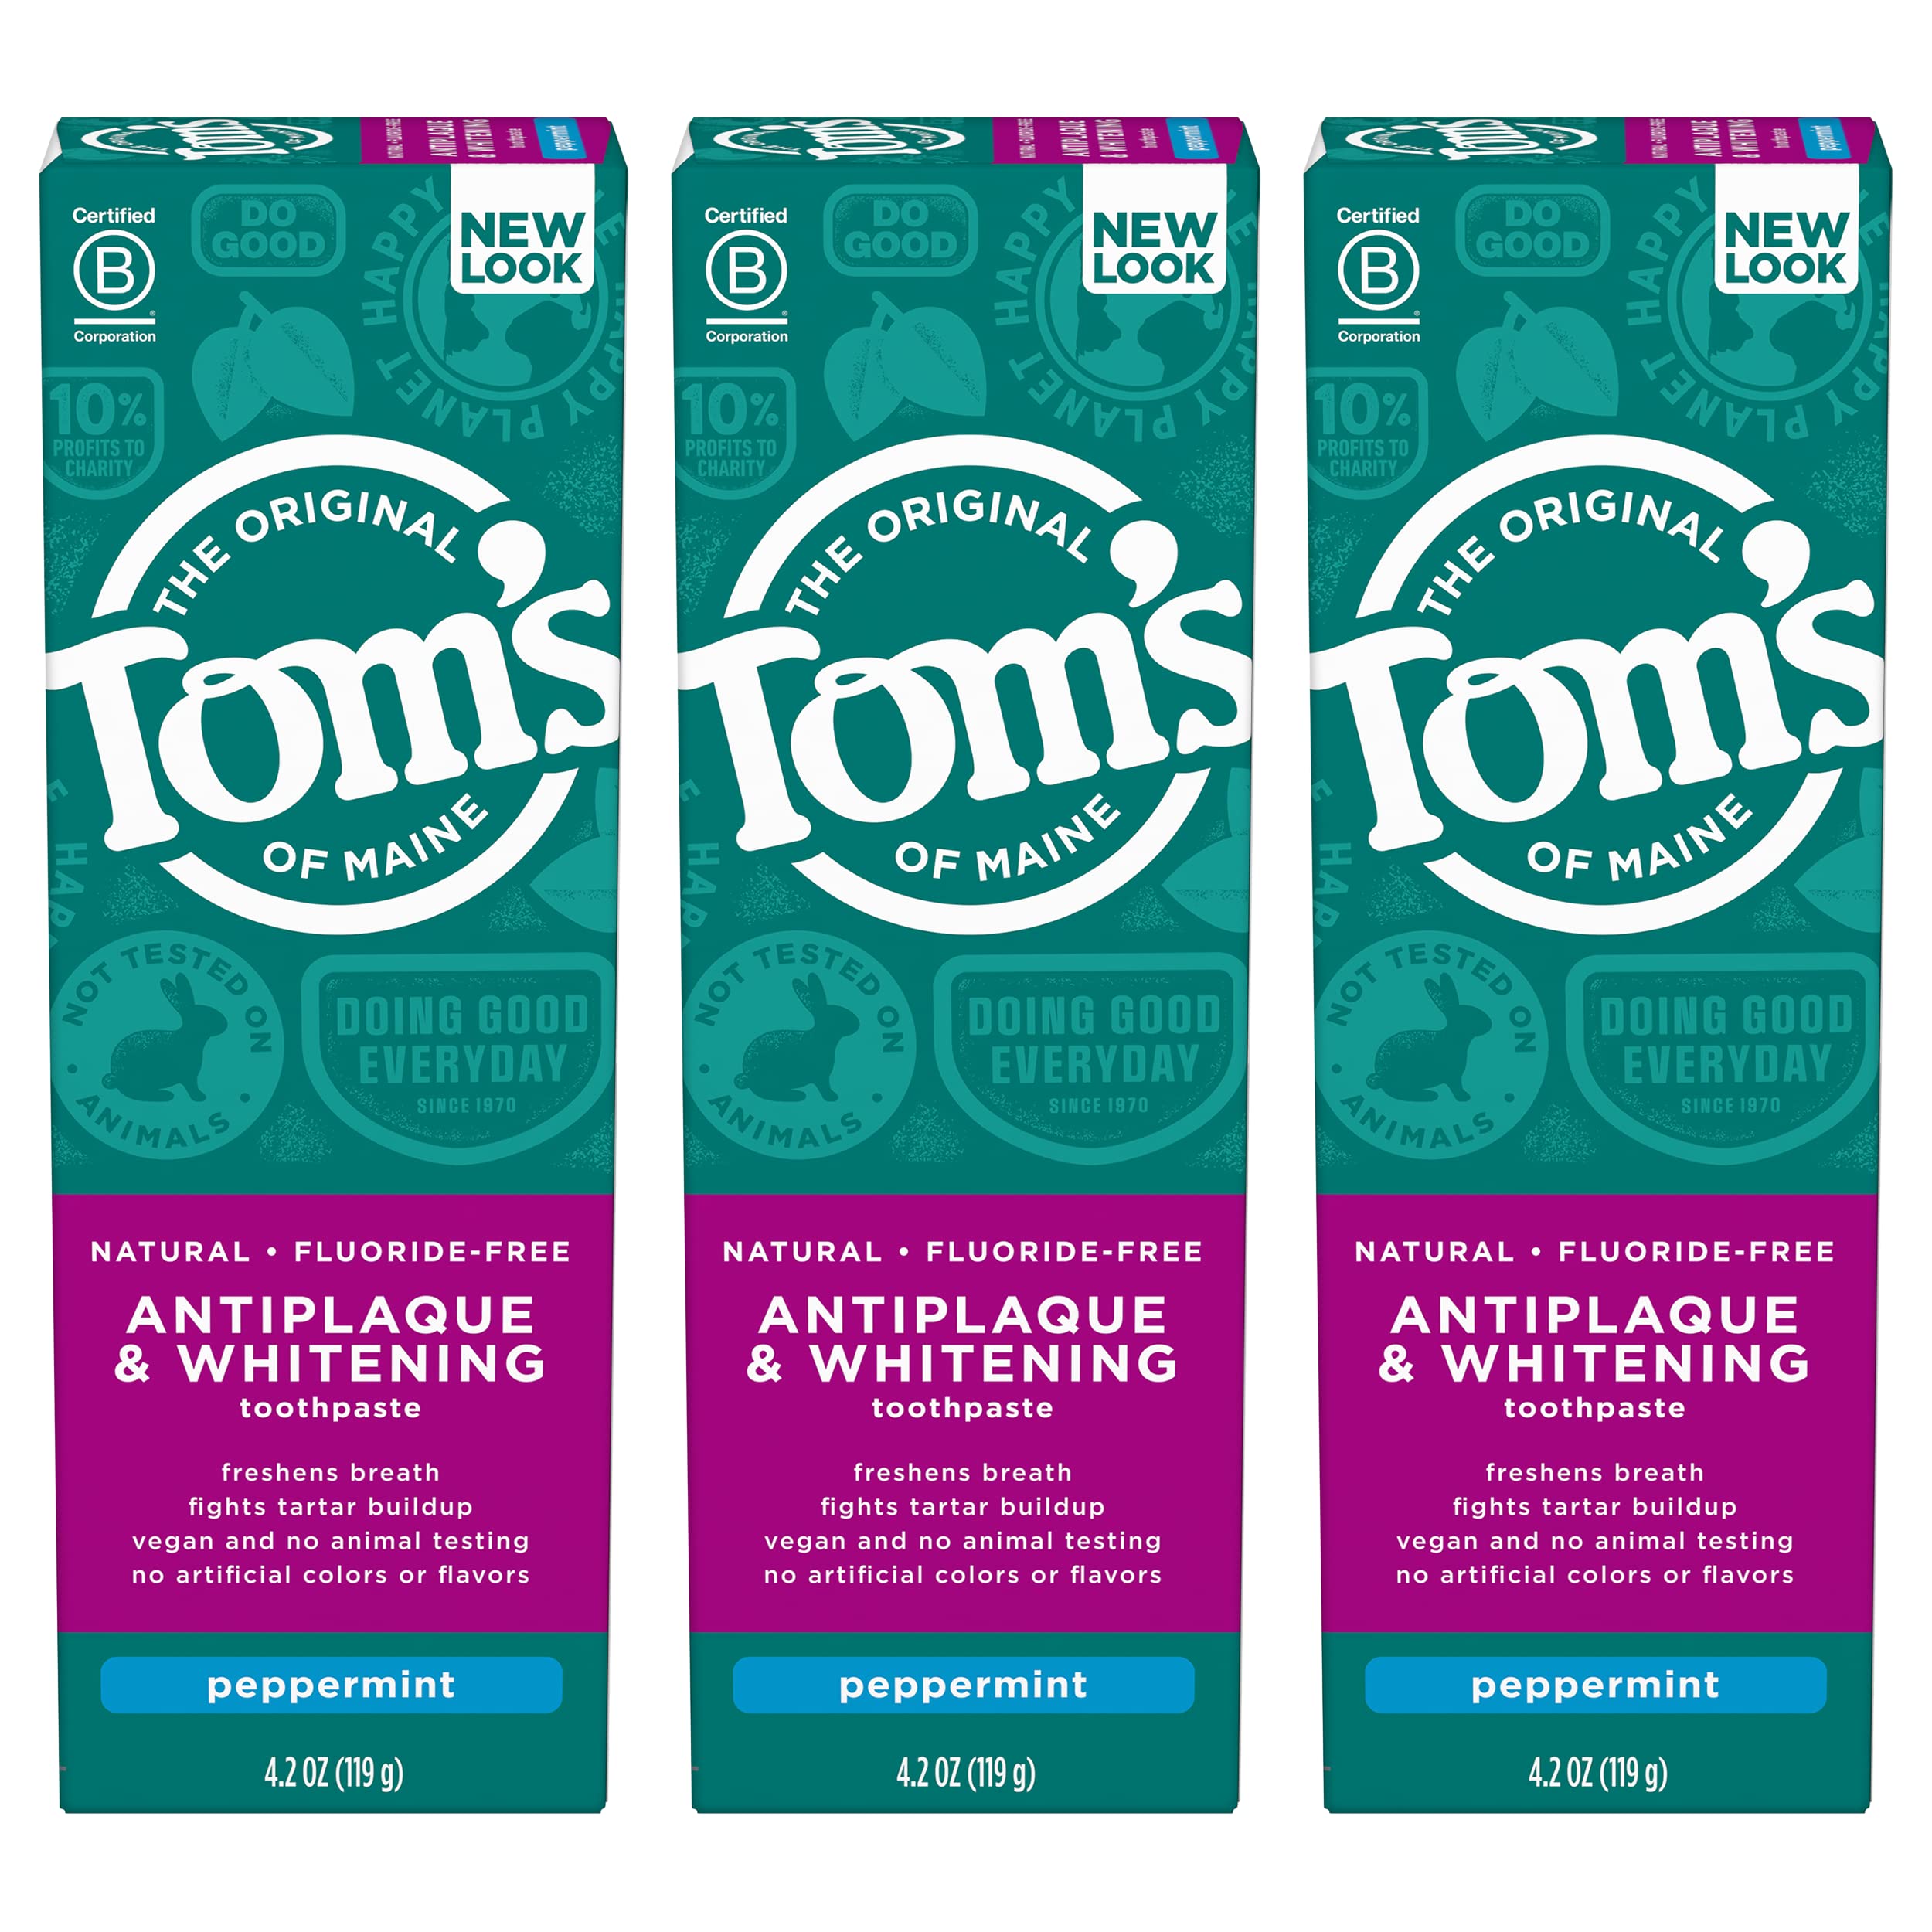 Tom's of Maine Fluoride-Free Antiplaque & Whitening Natural Toothpaste, Peppermint, 4.2 oz. 3-Pack (Packaging May Vary) Peppermint 4.2 Ounce (Pack of 3), List Price is $19.5, Now Only $10.15